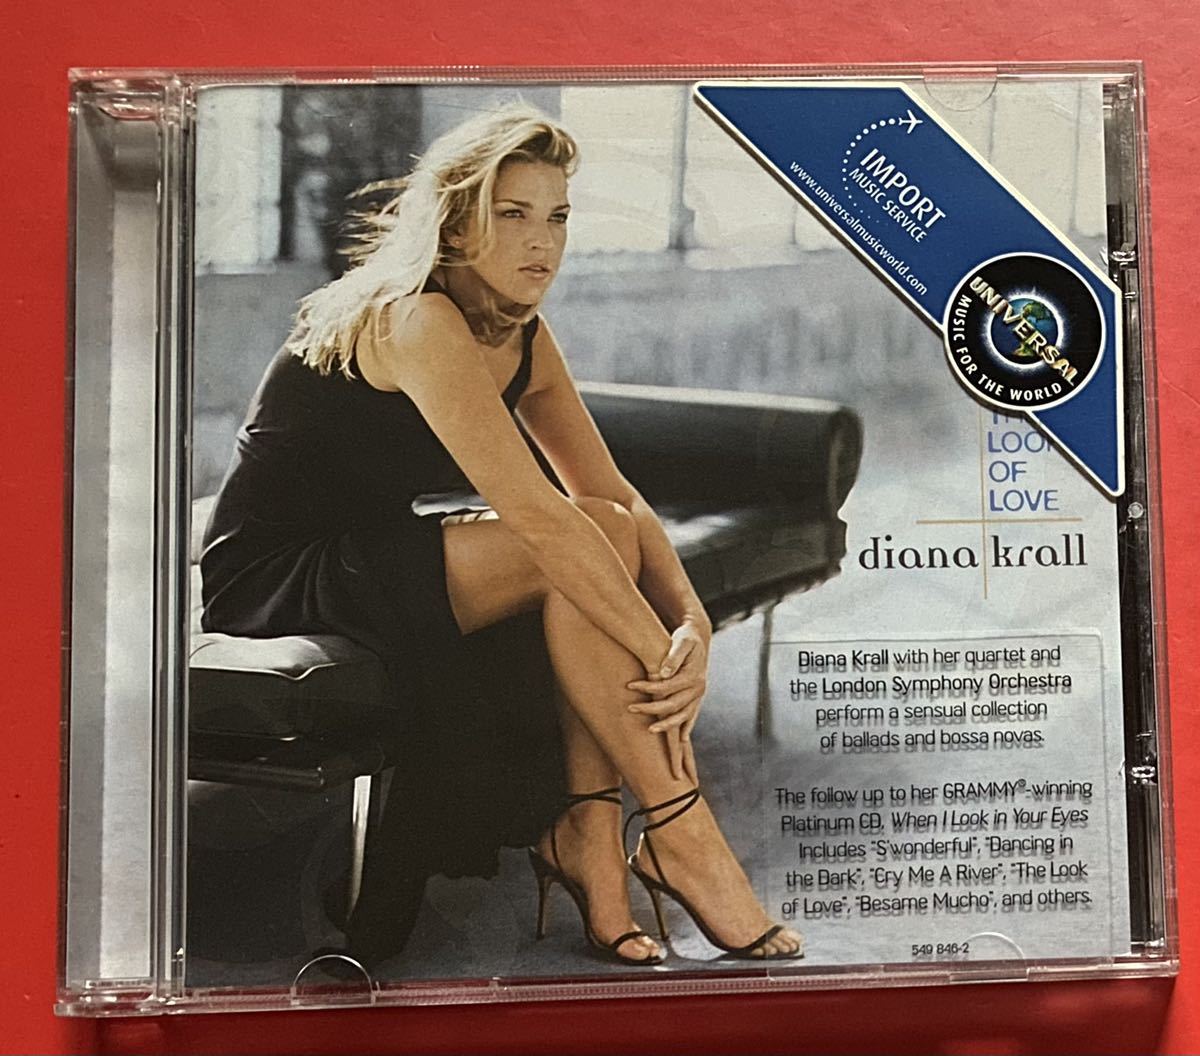 【CD】DIANA KRALL「THE LOOK OF LOVE」ダイアナ・クラール 輸入盤 [12210462]_画像1